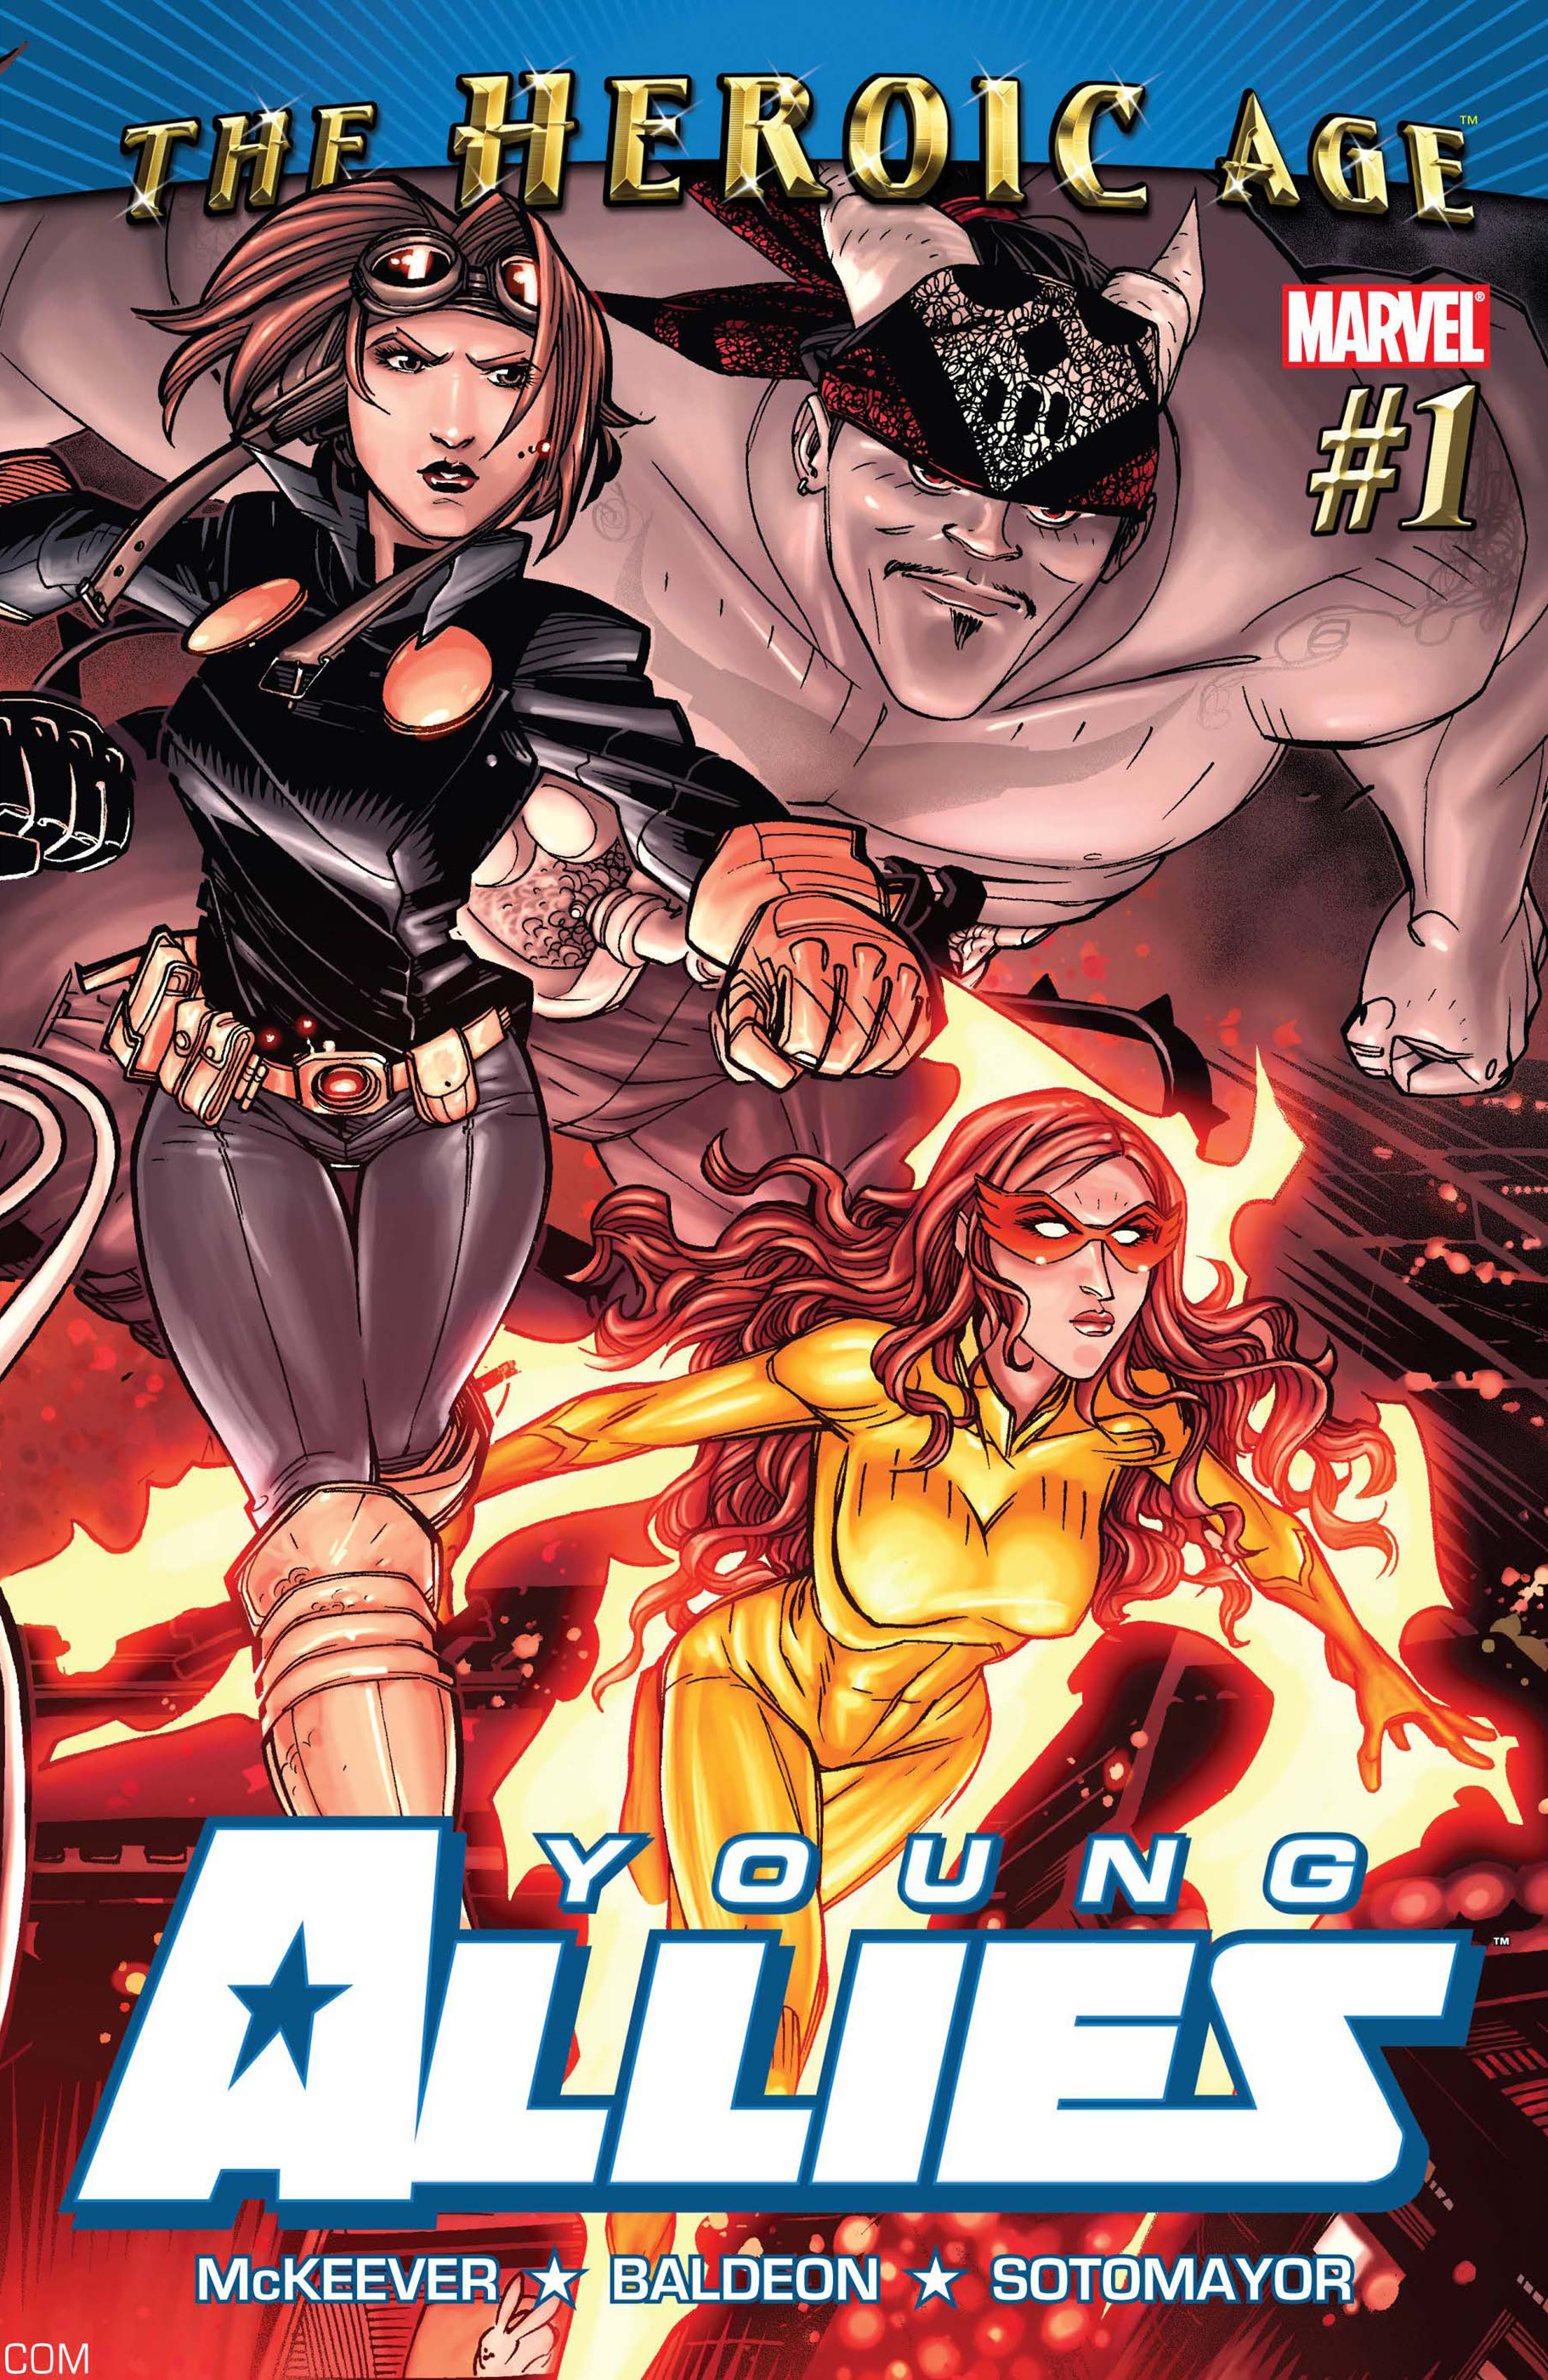 Young Allies (2010) #1